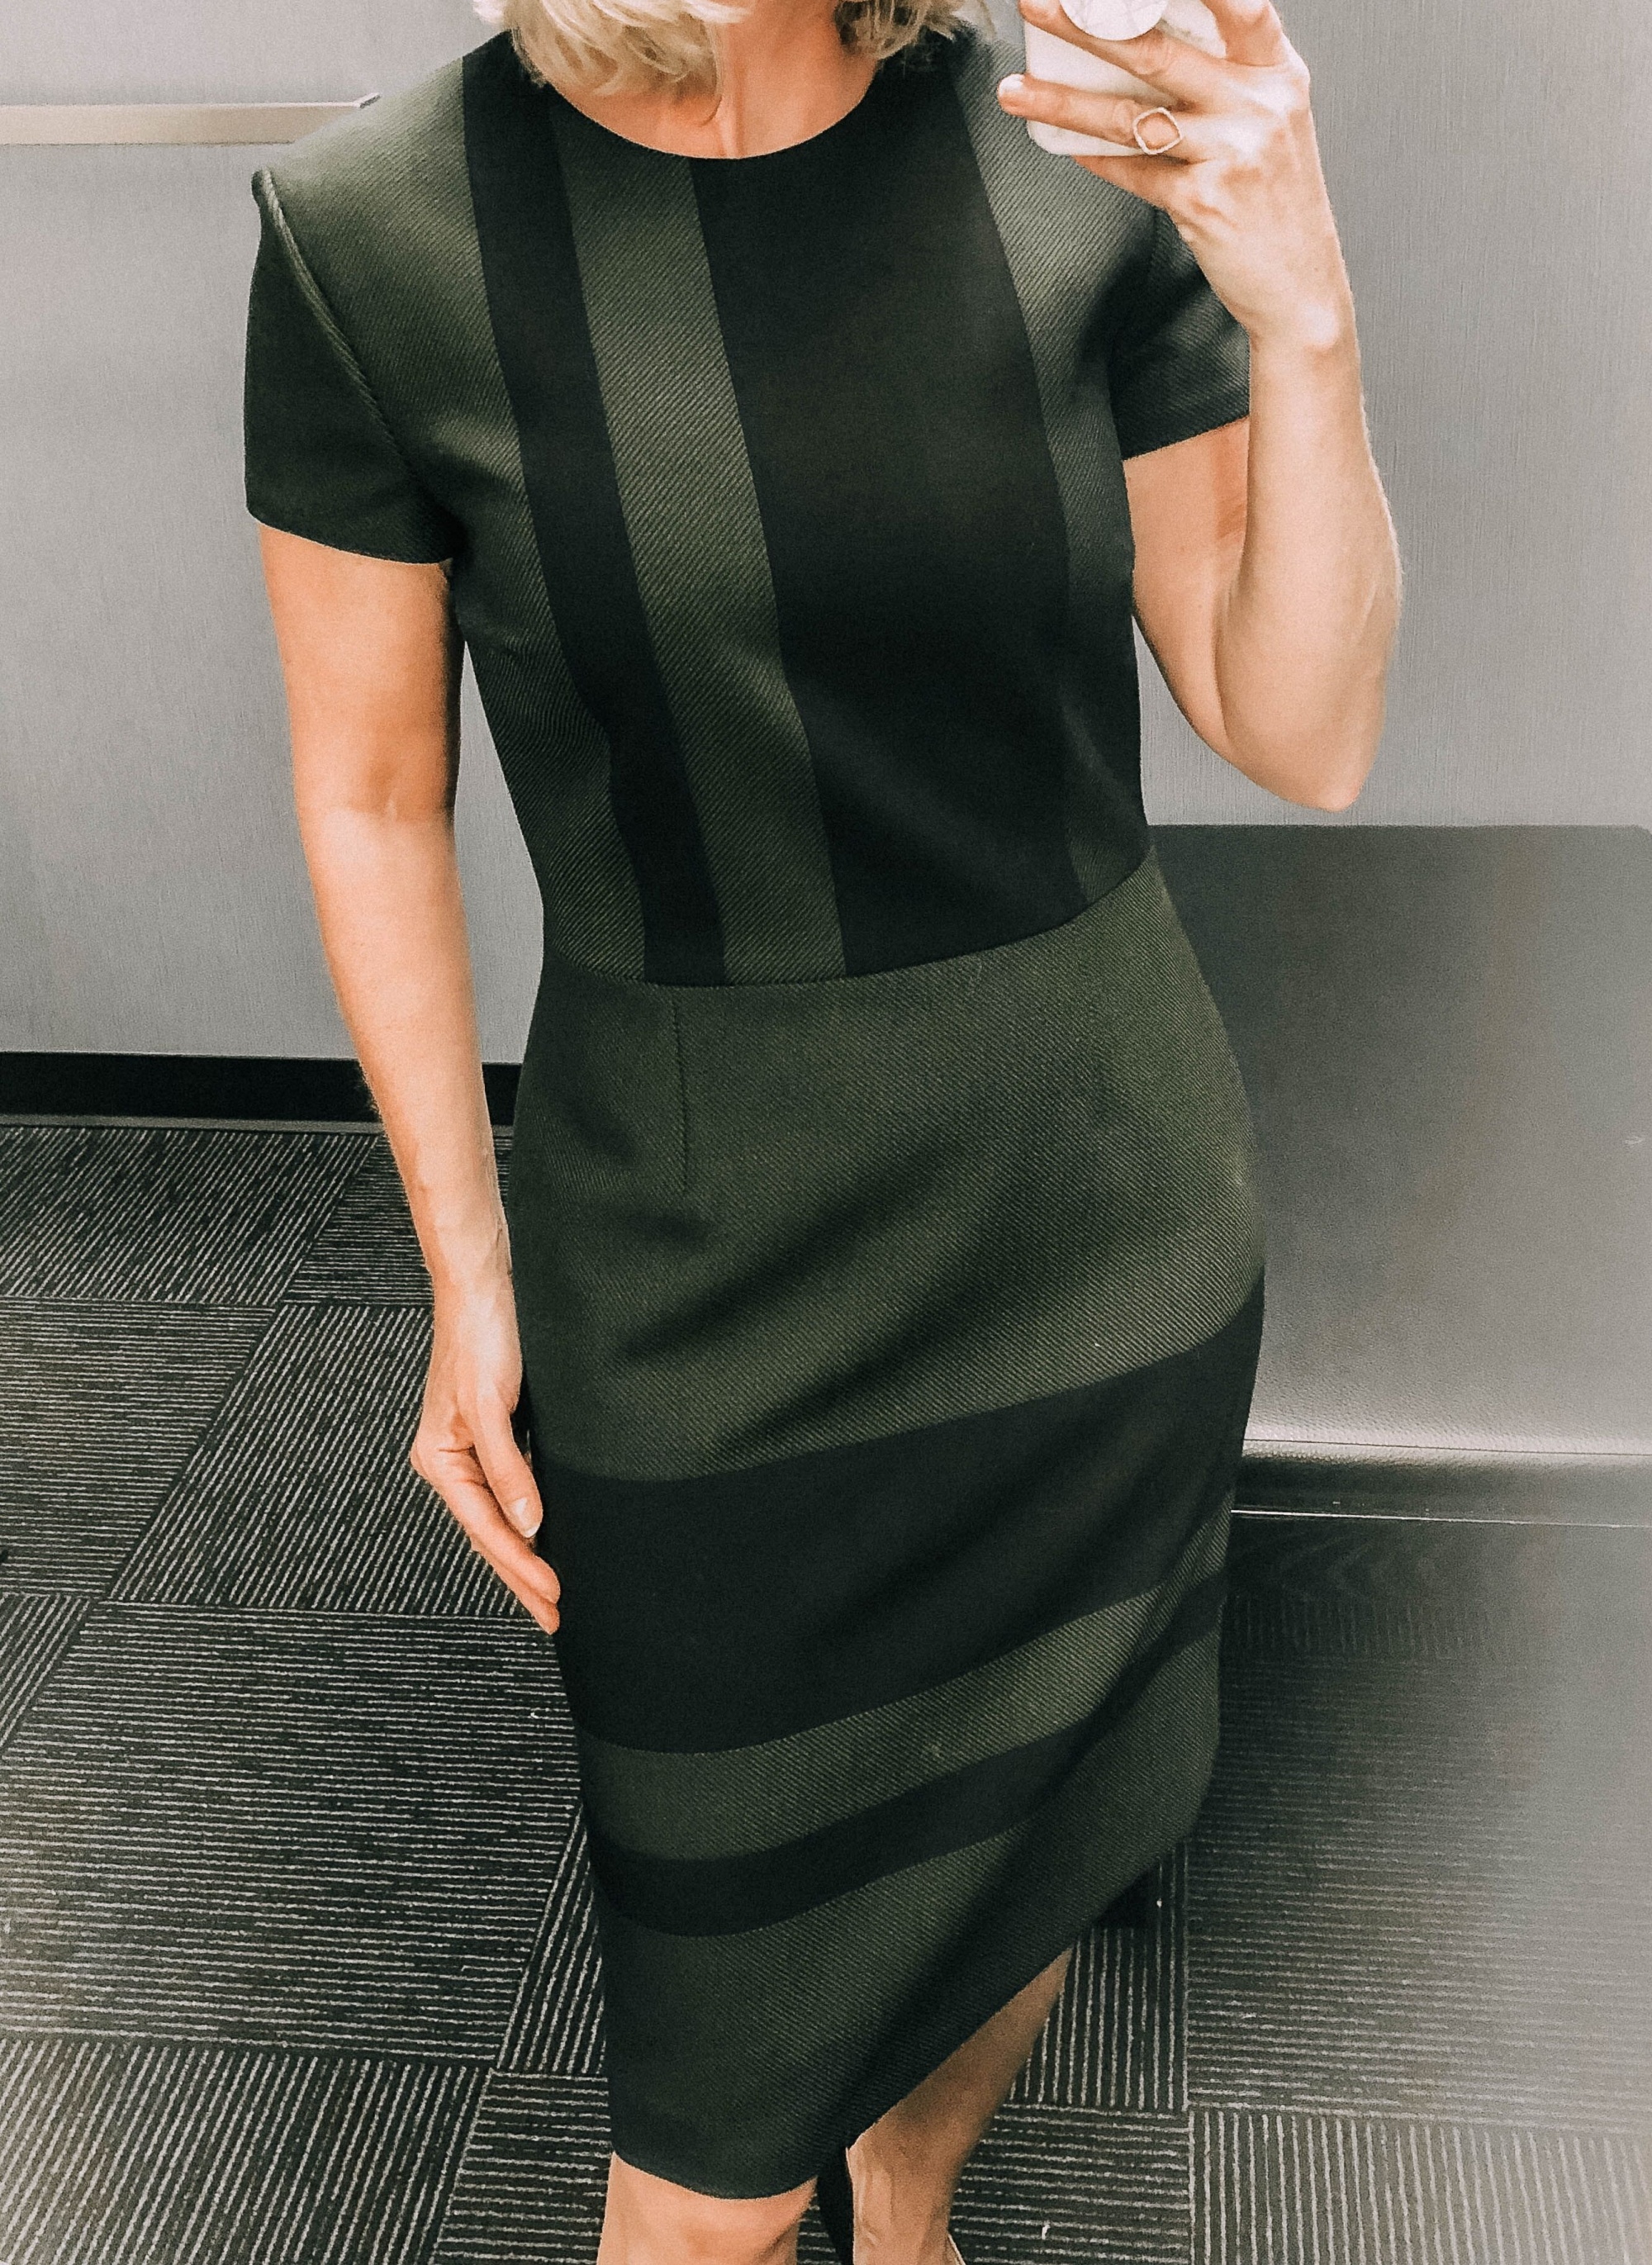 Nordstrom Sale Dresses, Fashion blogger Erin Busbee of BusbeeStyle.com featuring a green and black Boss dress perfect for the office from the Nordstrom Anniversary Sale 2019